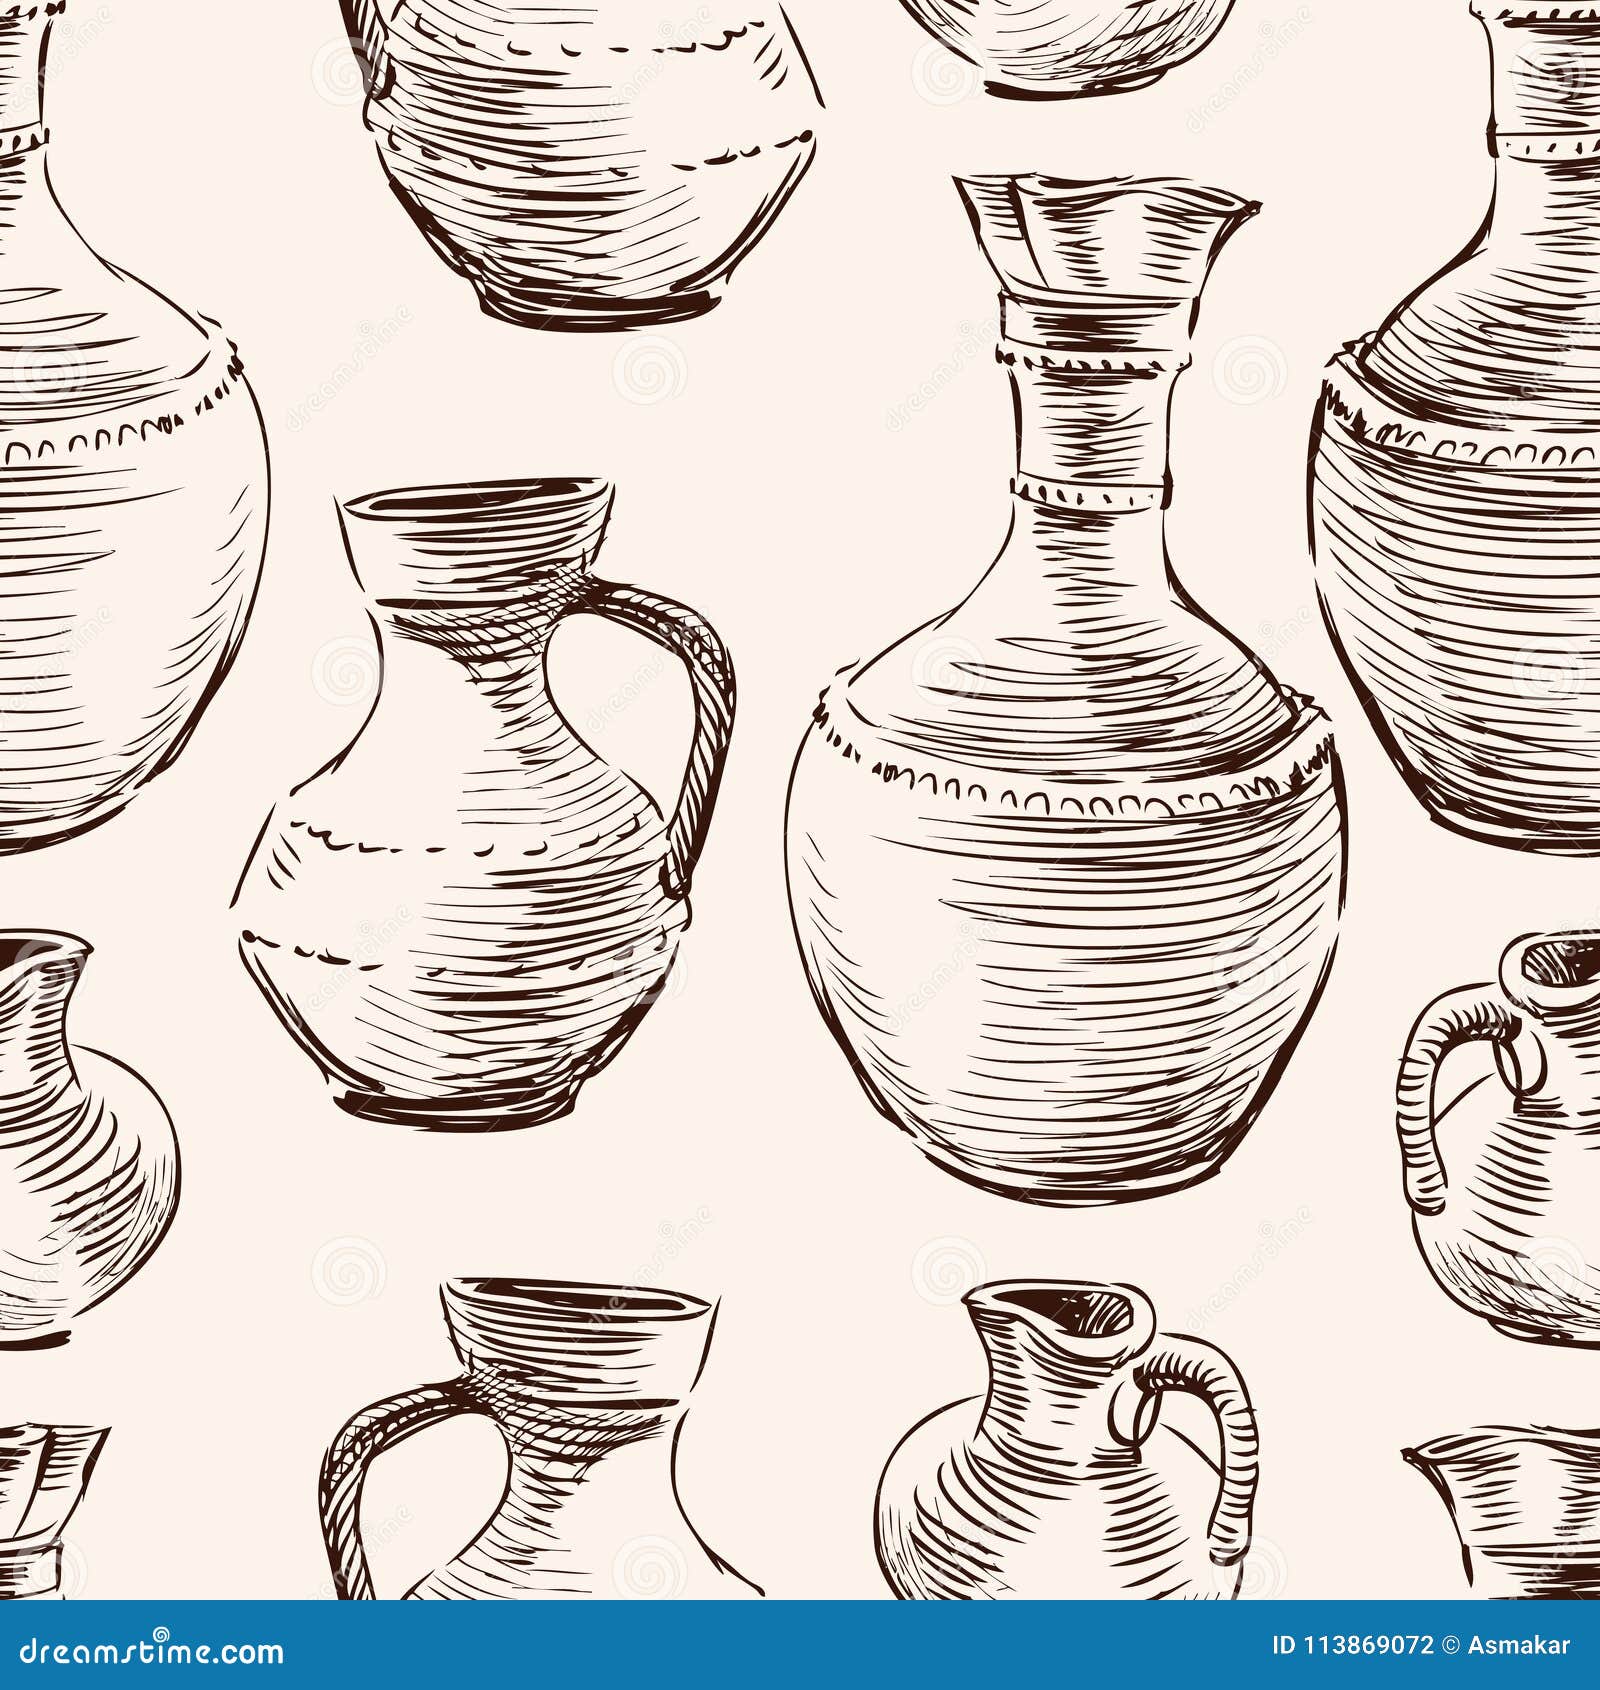 6,663 Pottery Sketches Images, Stock Photos & Vectors | Shutterstock